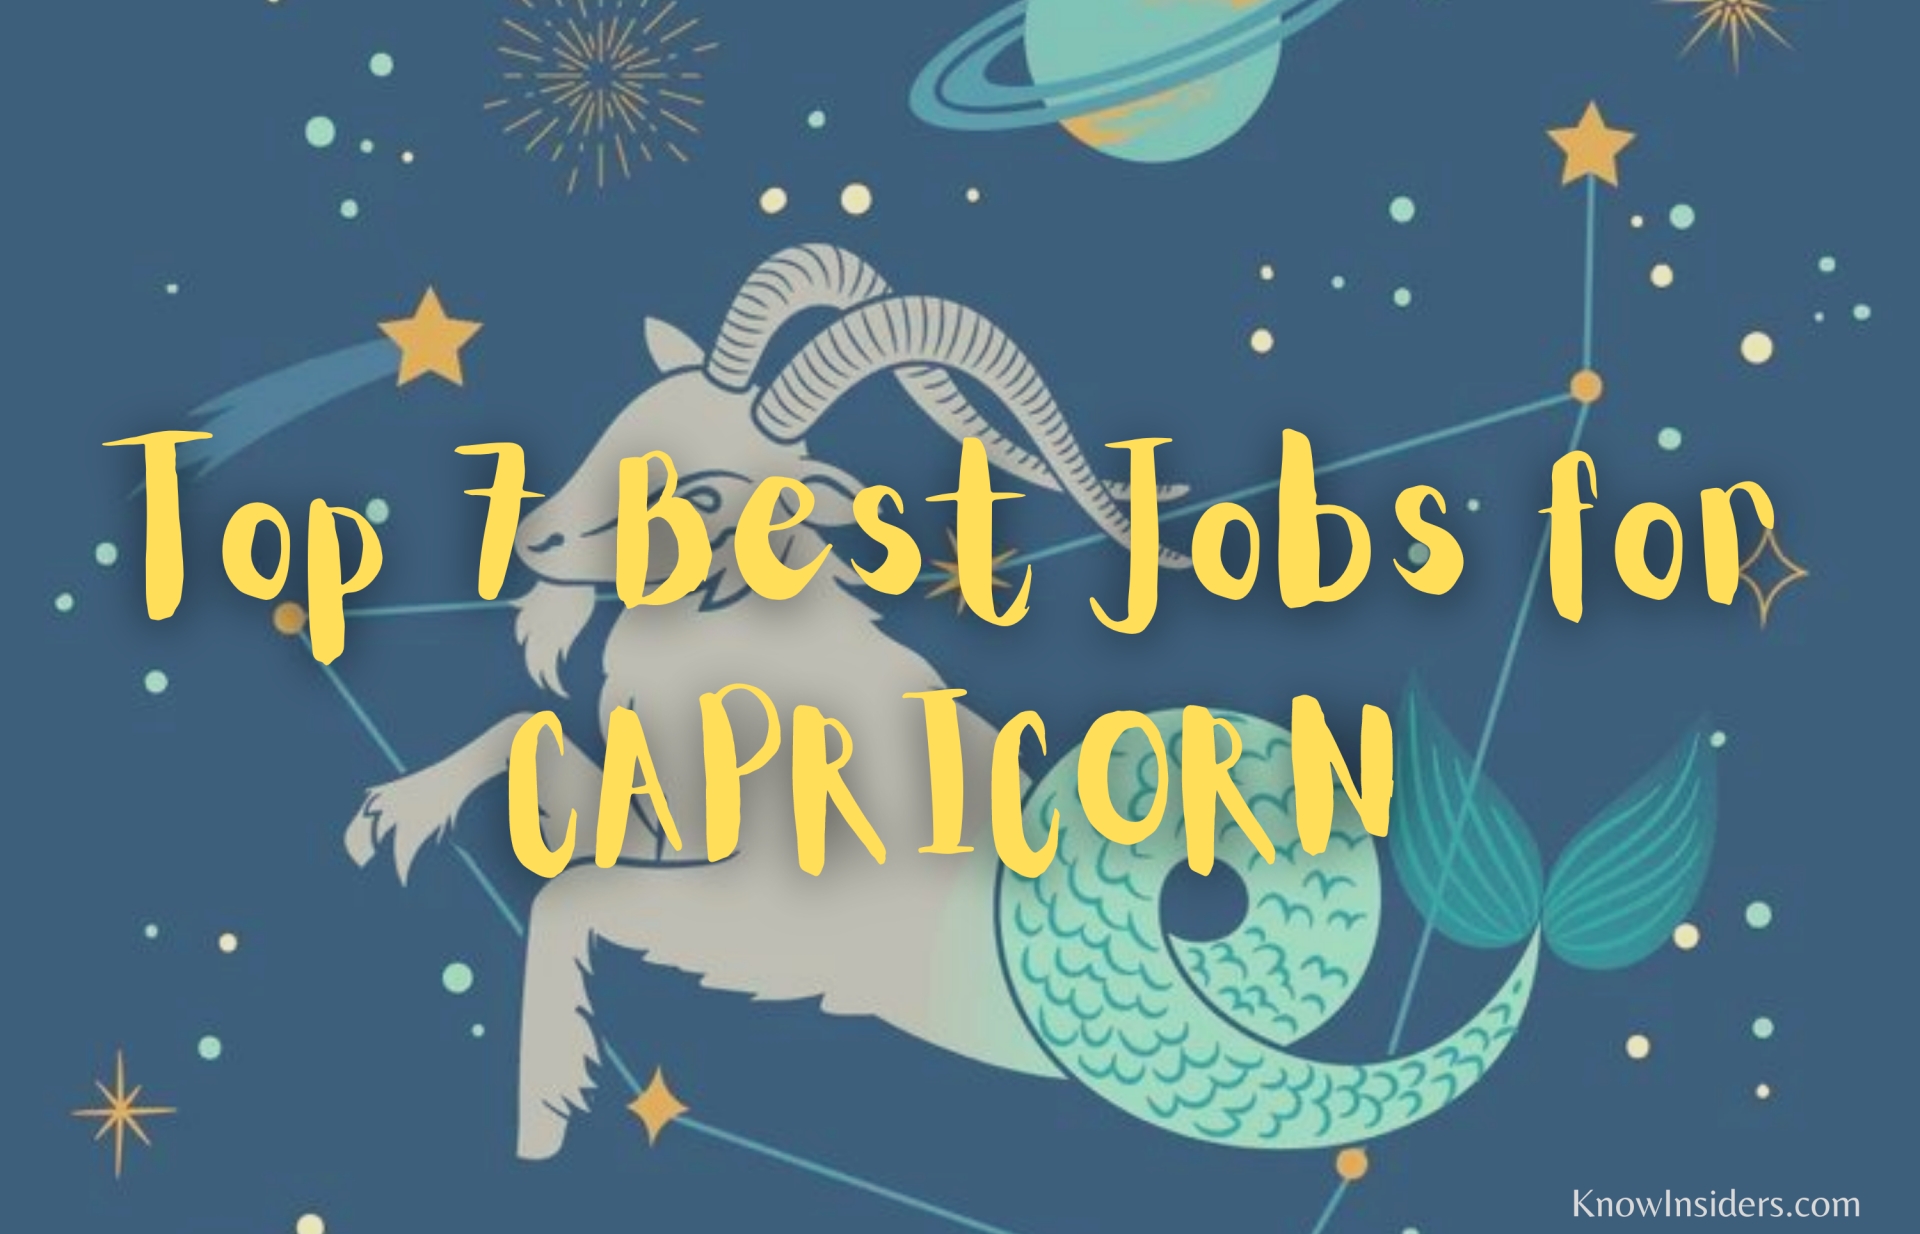 Top 7 Best Jobs for CAPRICORN Career Guide Horoscope KnowInsiders